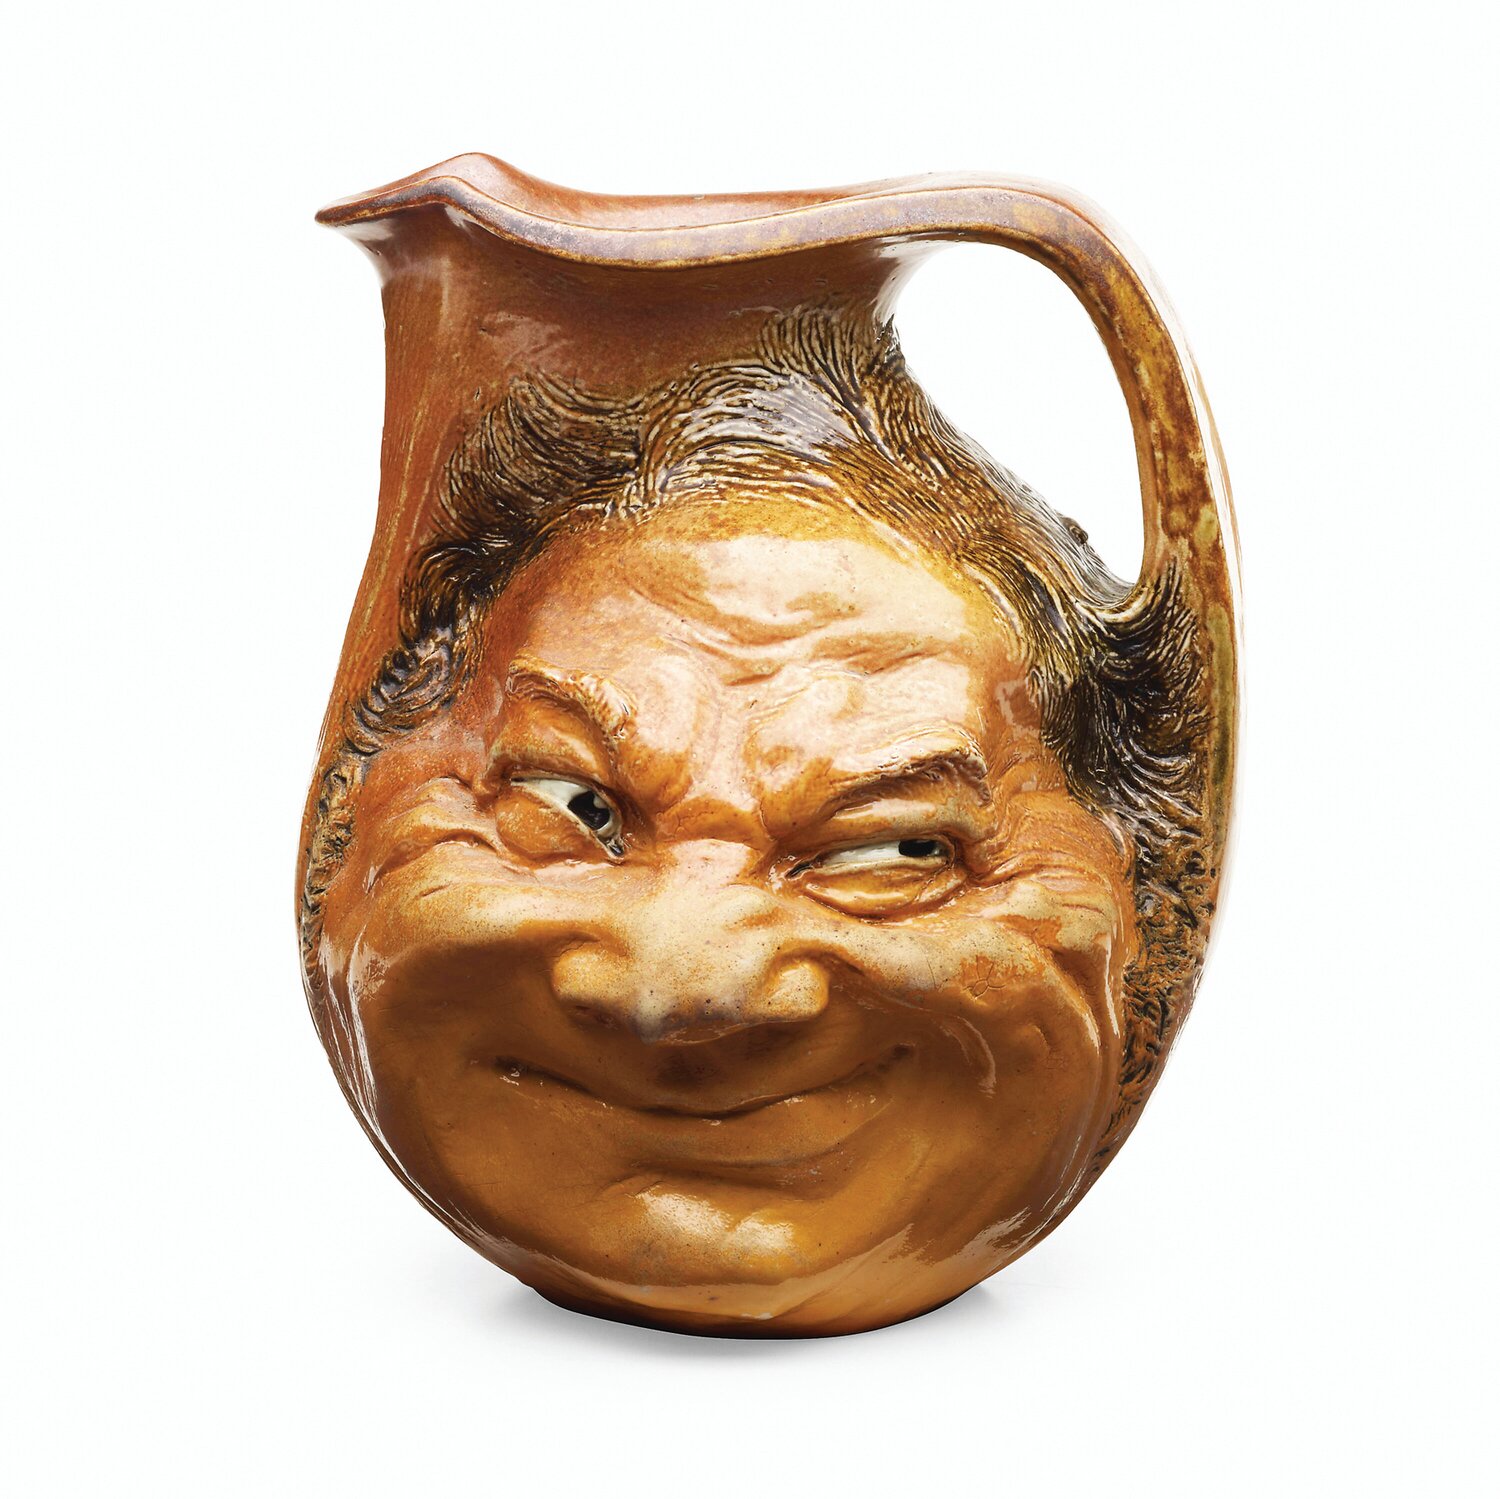 This Martin Brothers Pottery Double face jug (est. $4,500-6,500) is among the works in The Life Collection of Terry & Ralph Kovel, a major auction event at Rago in Lambertville.